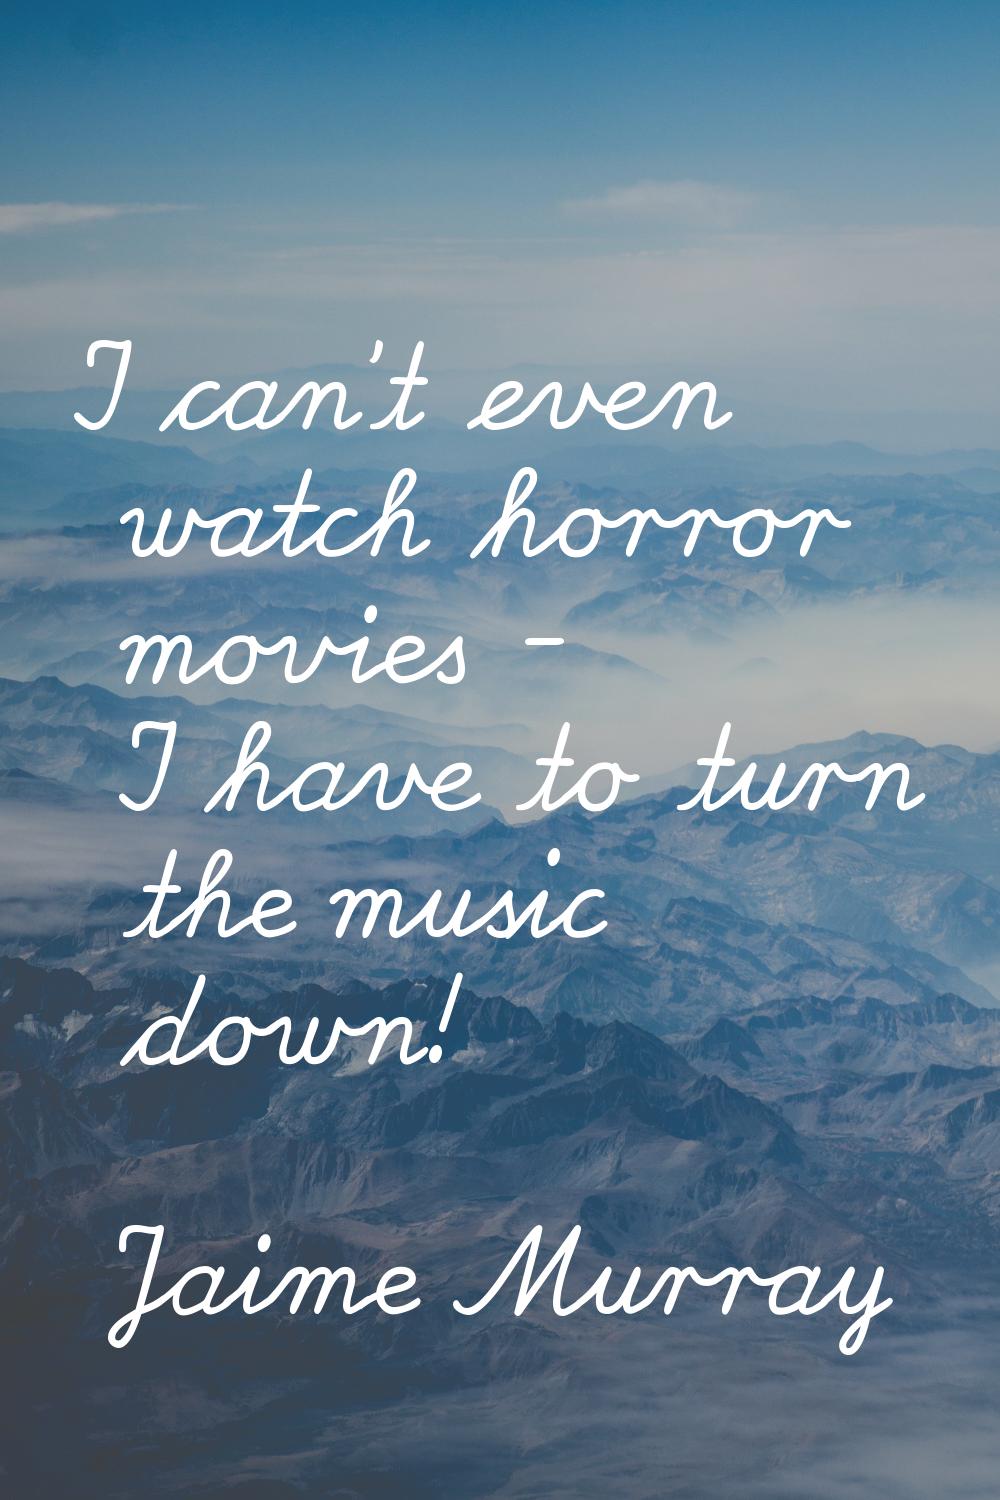 I can't even watch horror movies - I have to turn the music down!